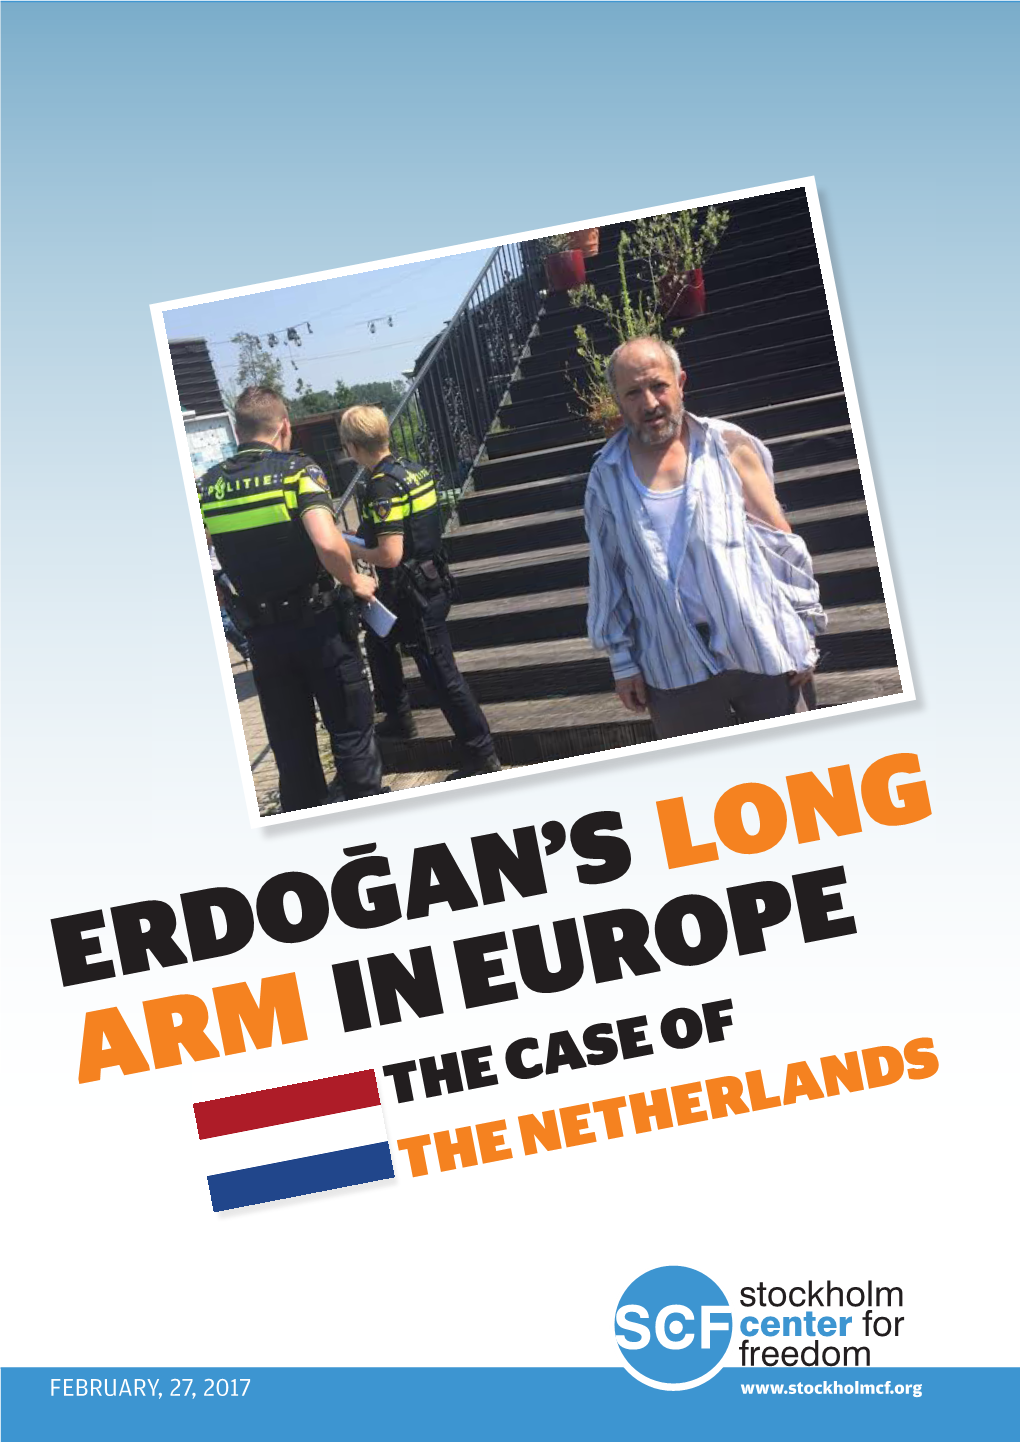 Erdoğan's Long Arm in Europe: the Case of the Netherlands